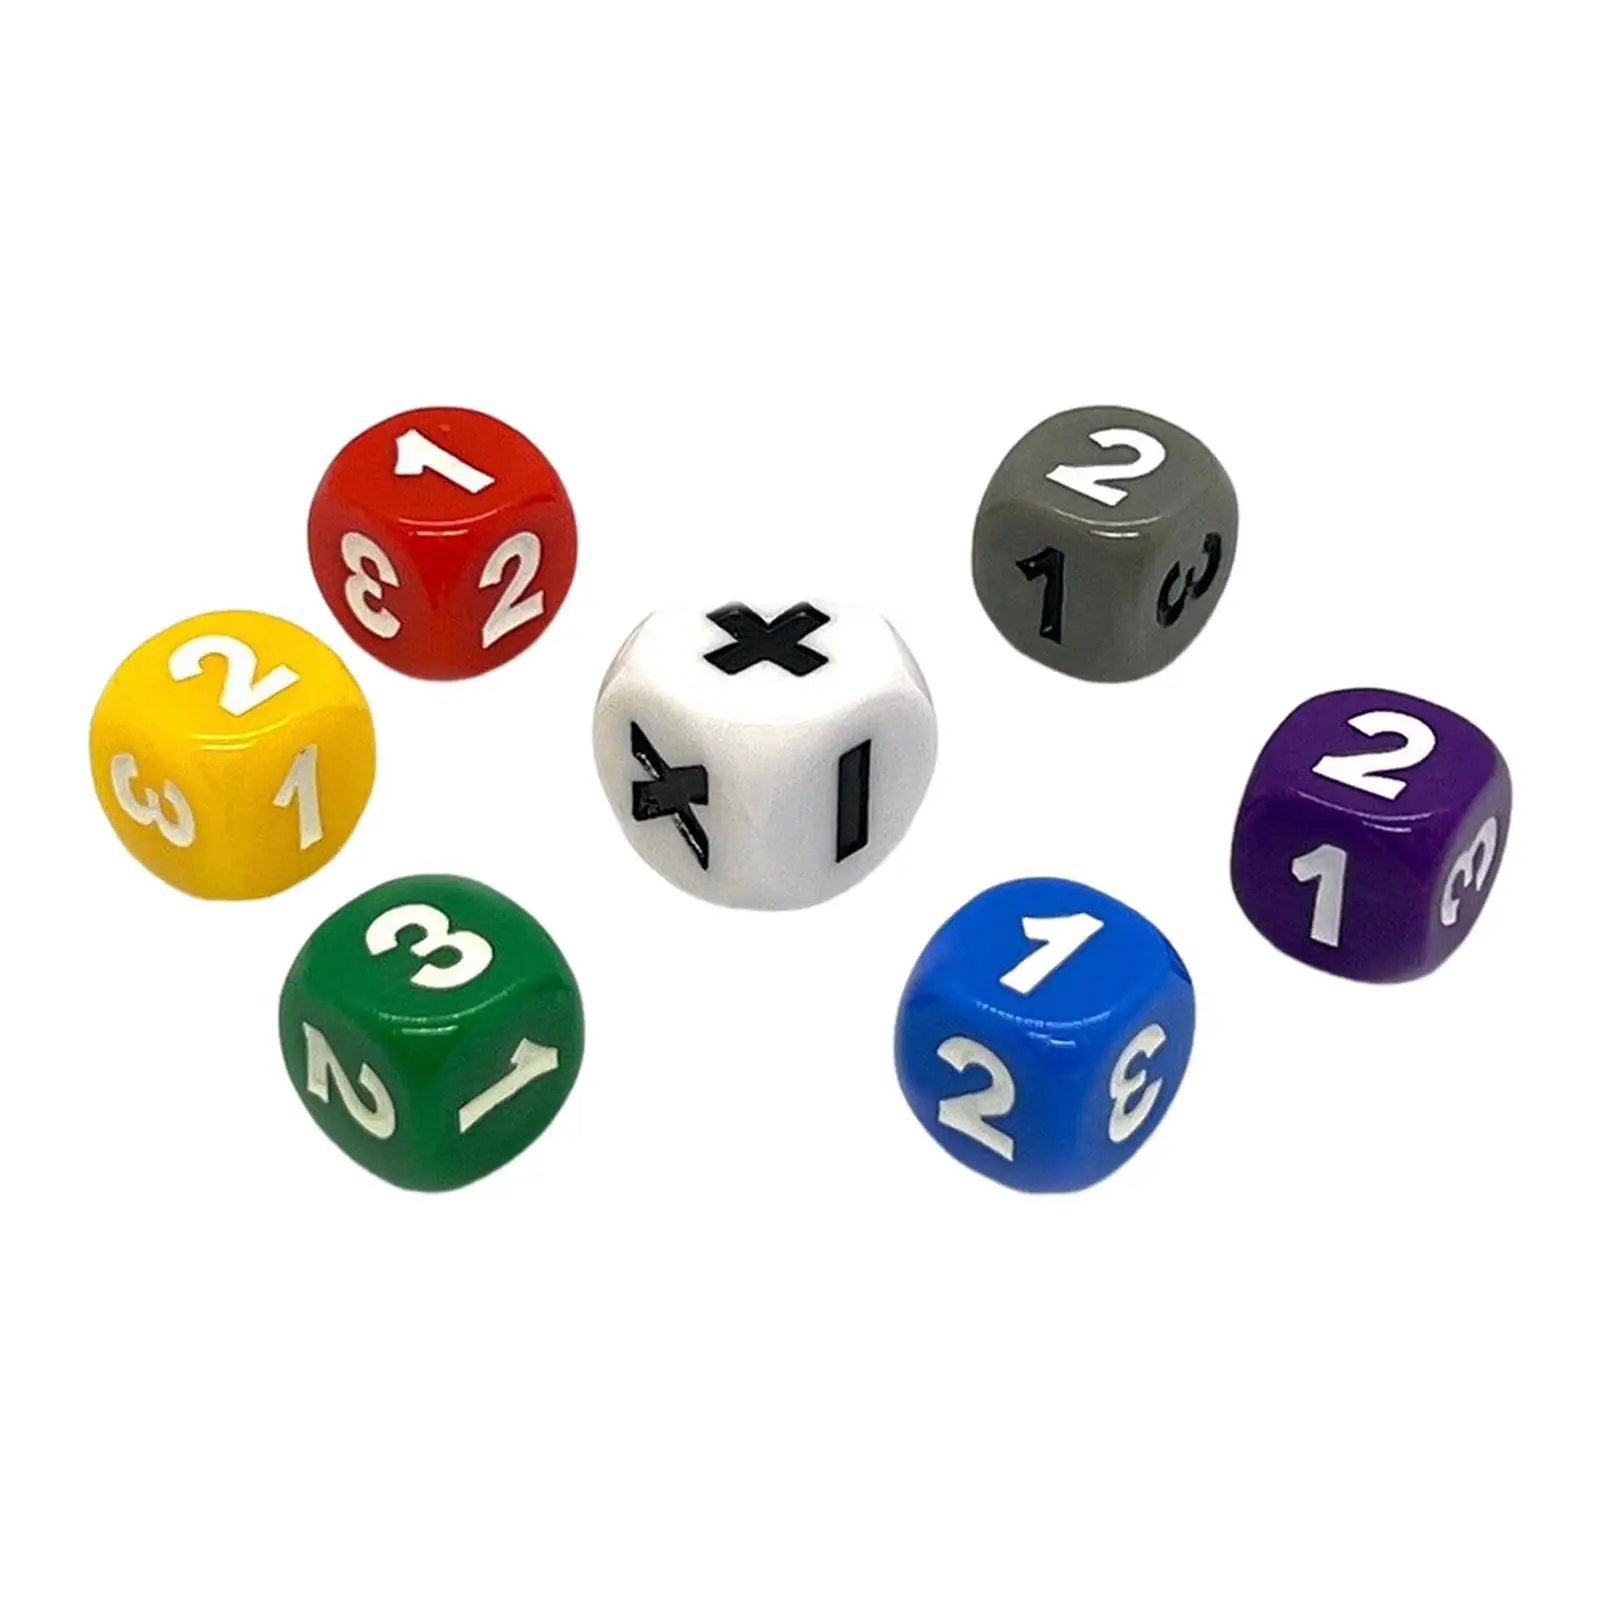 7 Pieces Teaching Dice Counting Toys Lightwheigt Educational Toys for Tabletop